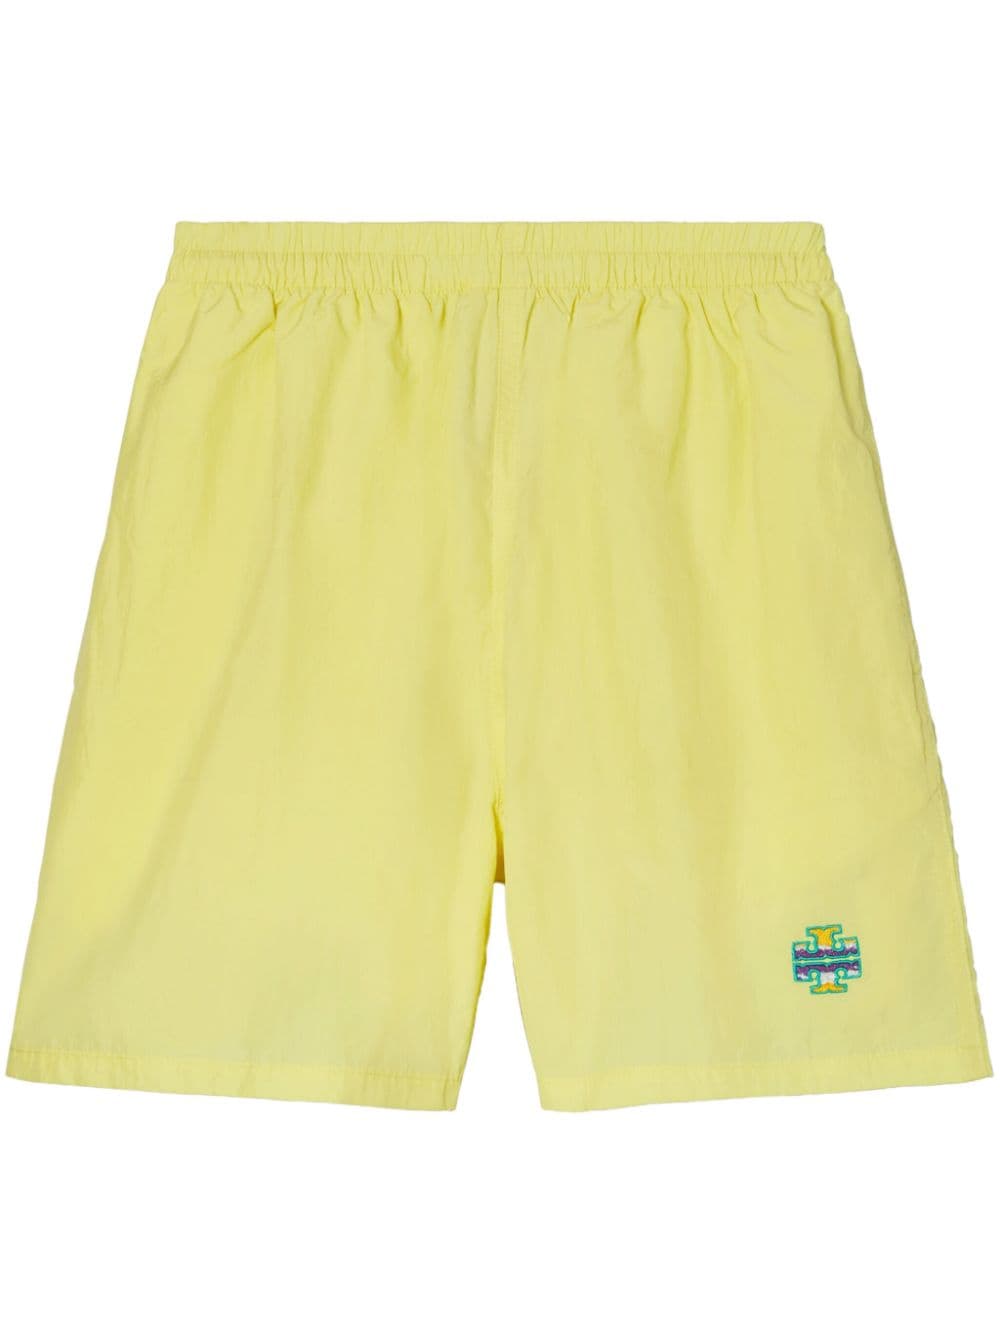 Tory Burch logo-embroidered shorts - Yellow von Tory Burch